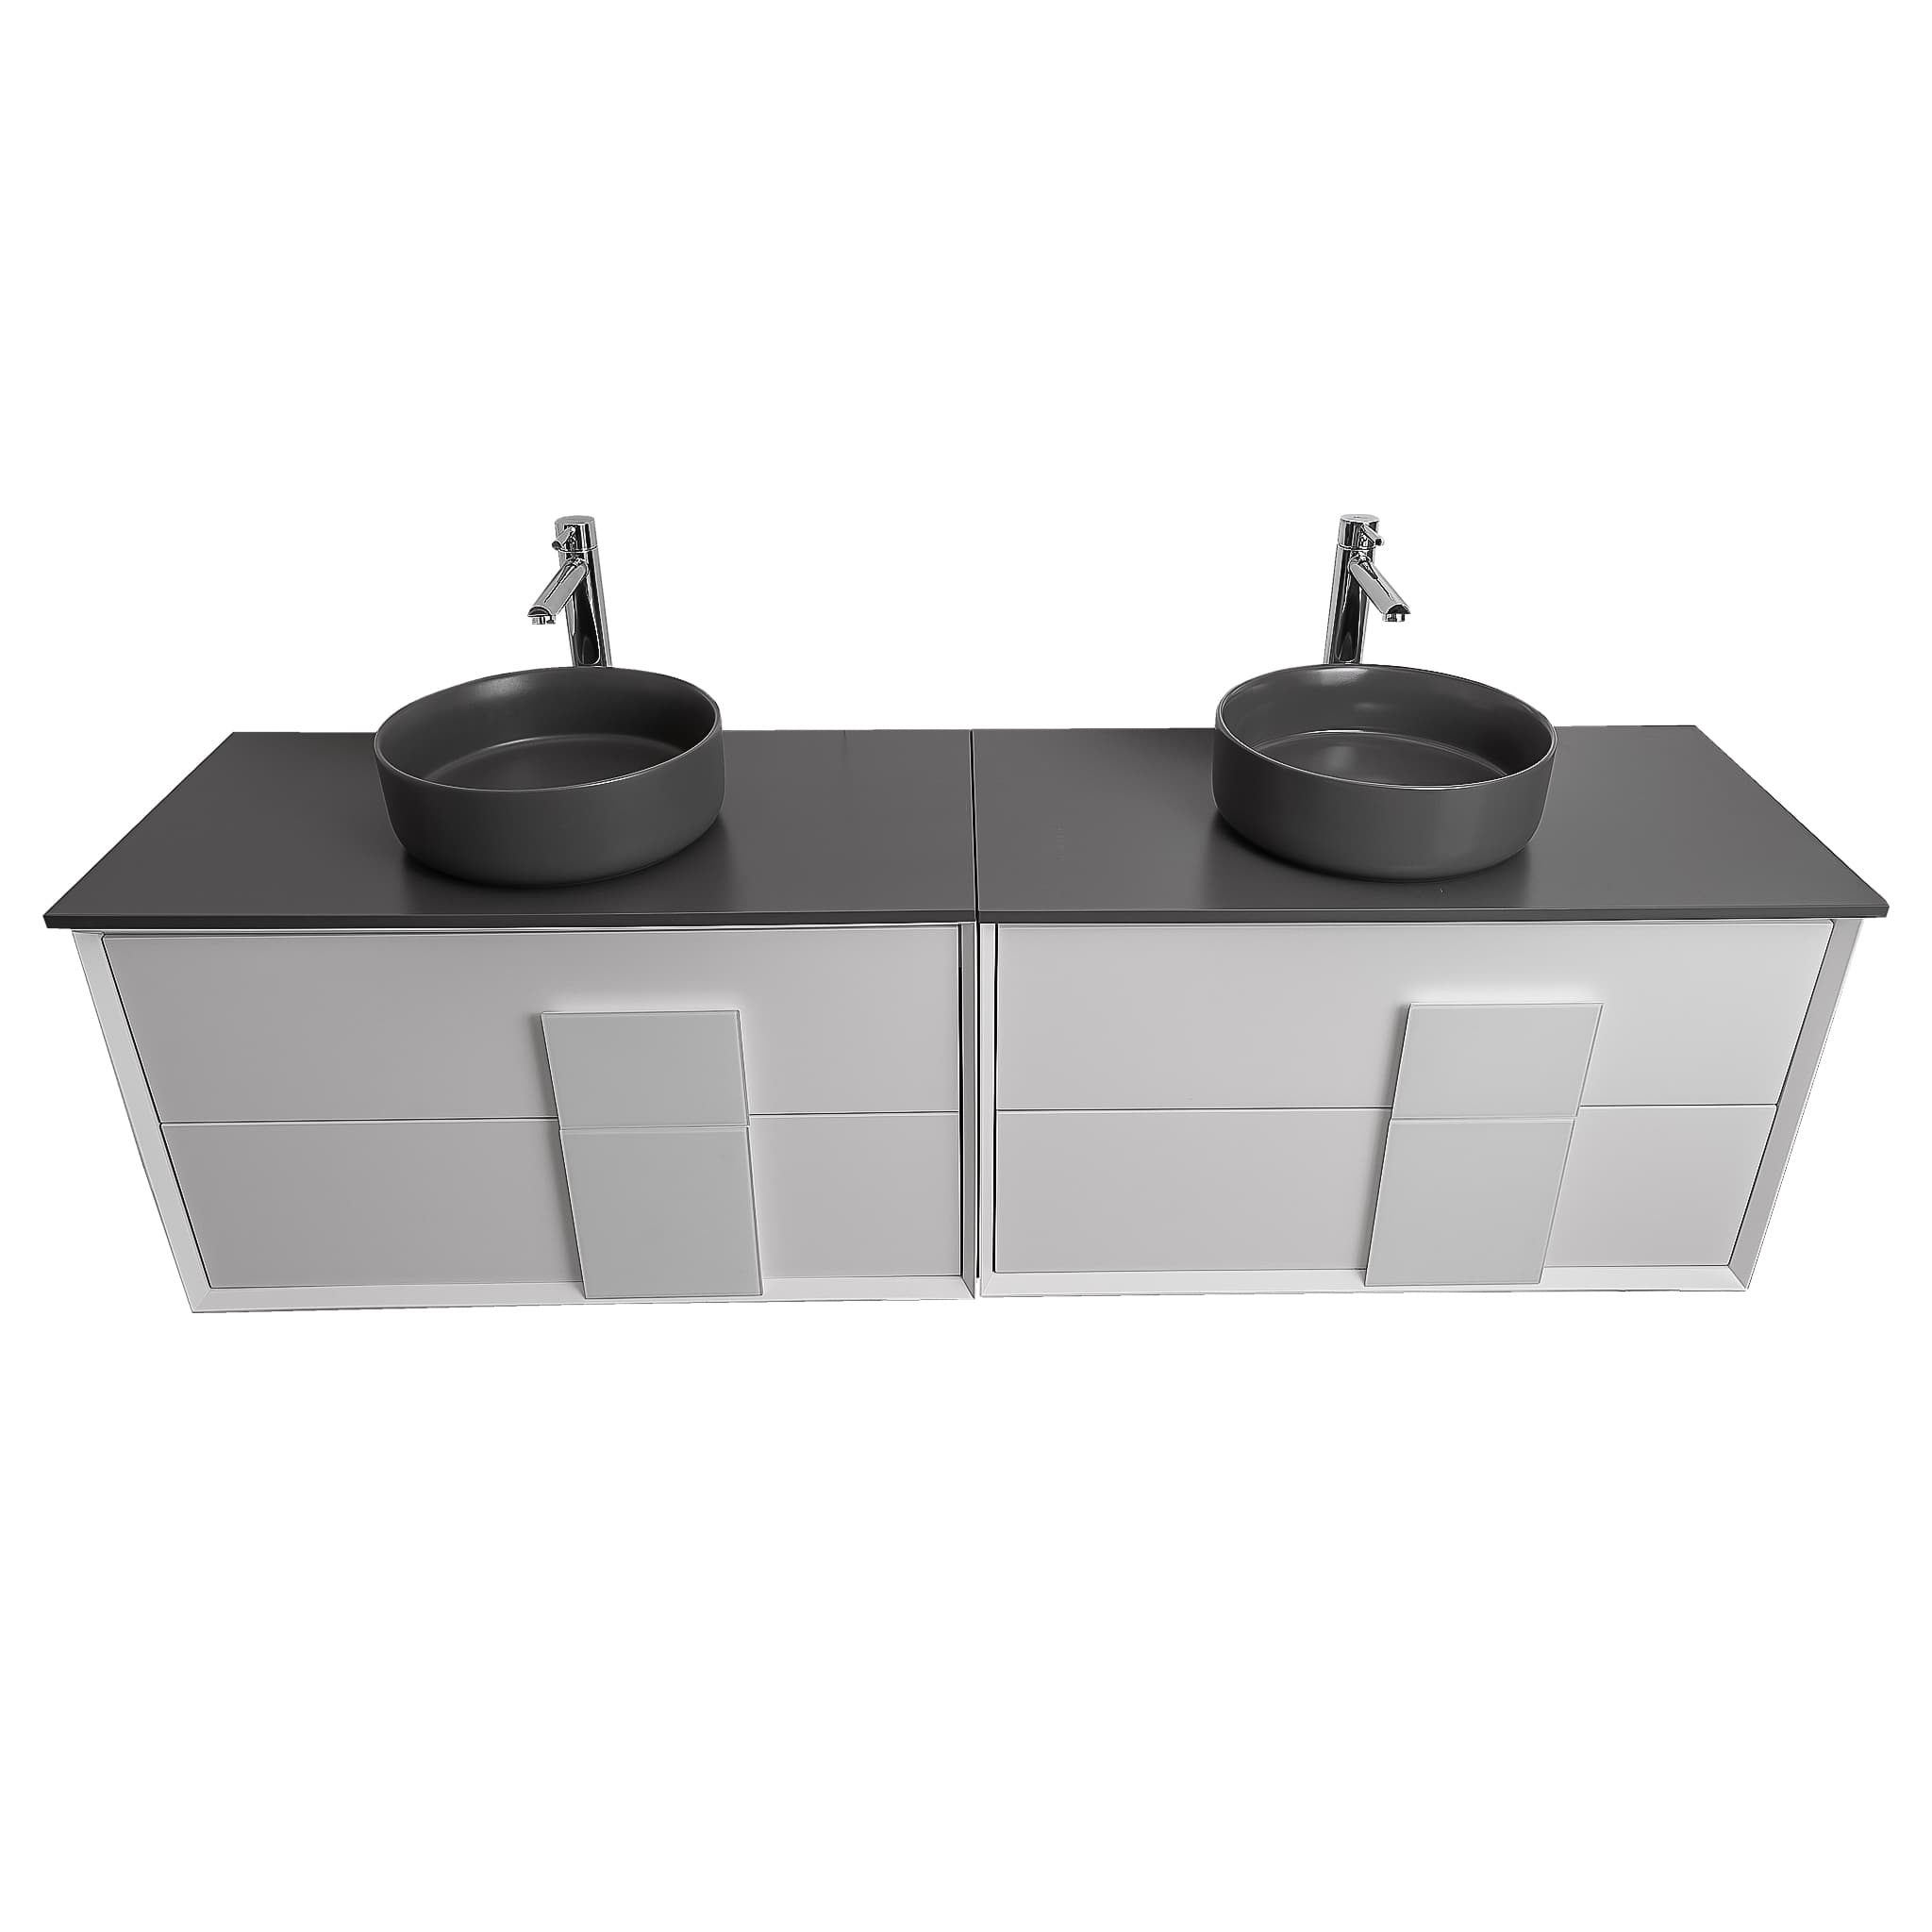 Piazza 63 Matte White With White Handle Cabinet, Ares Grey Ceniza Top and Two Ares Grey Ceniza Ceramic Basin, Wall Mounted Modern Vanity Set